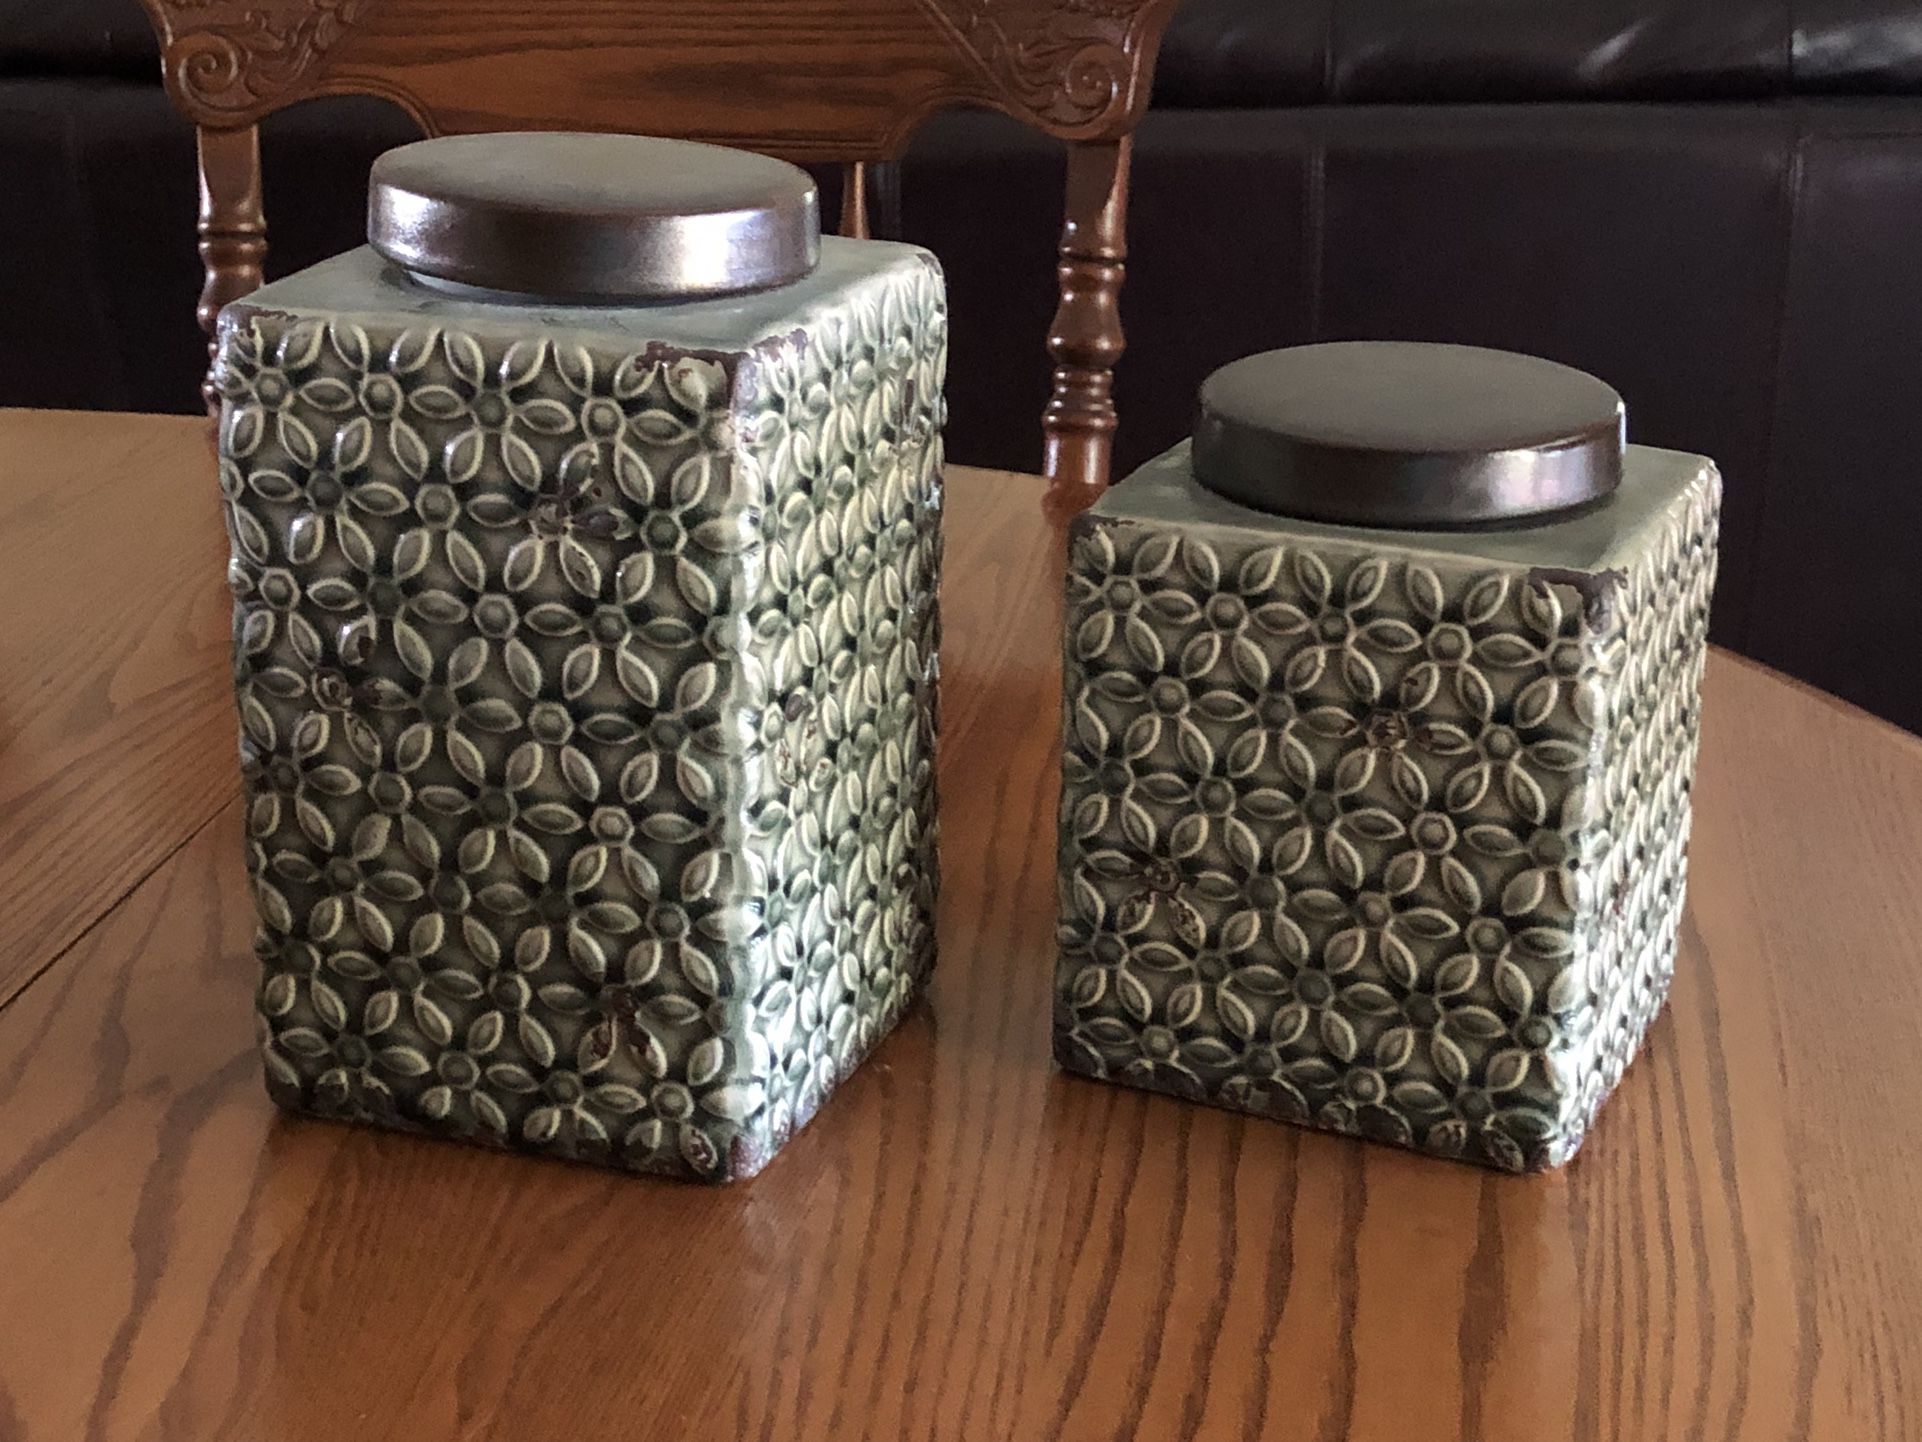 2 Decorative Glass Canisters, 9.25” X 5.25” X 5.25” and 7” X 5.25” X 5.25”  Original Prices: $9.99 & $7.99